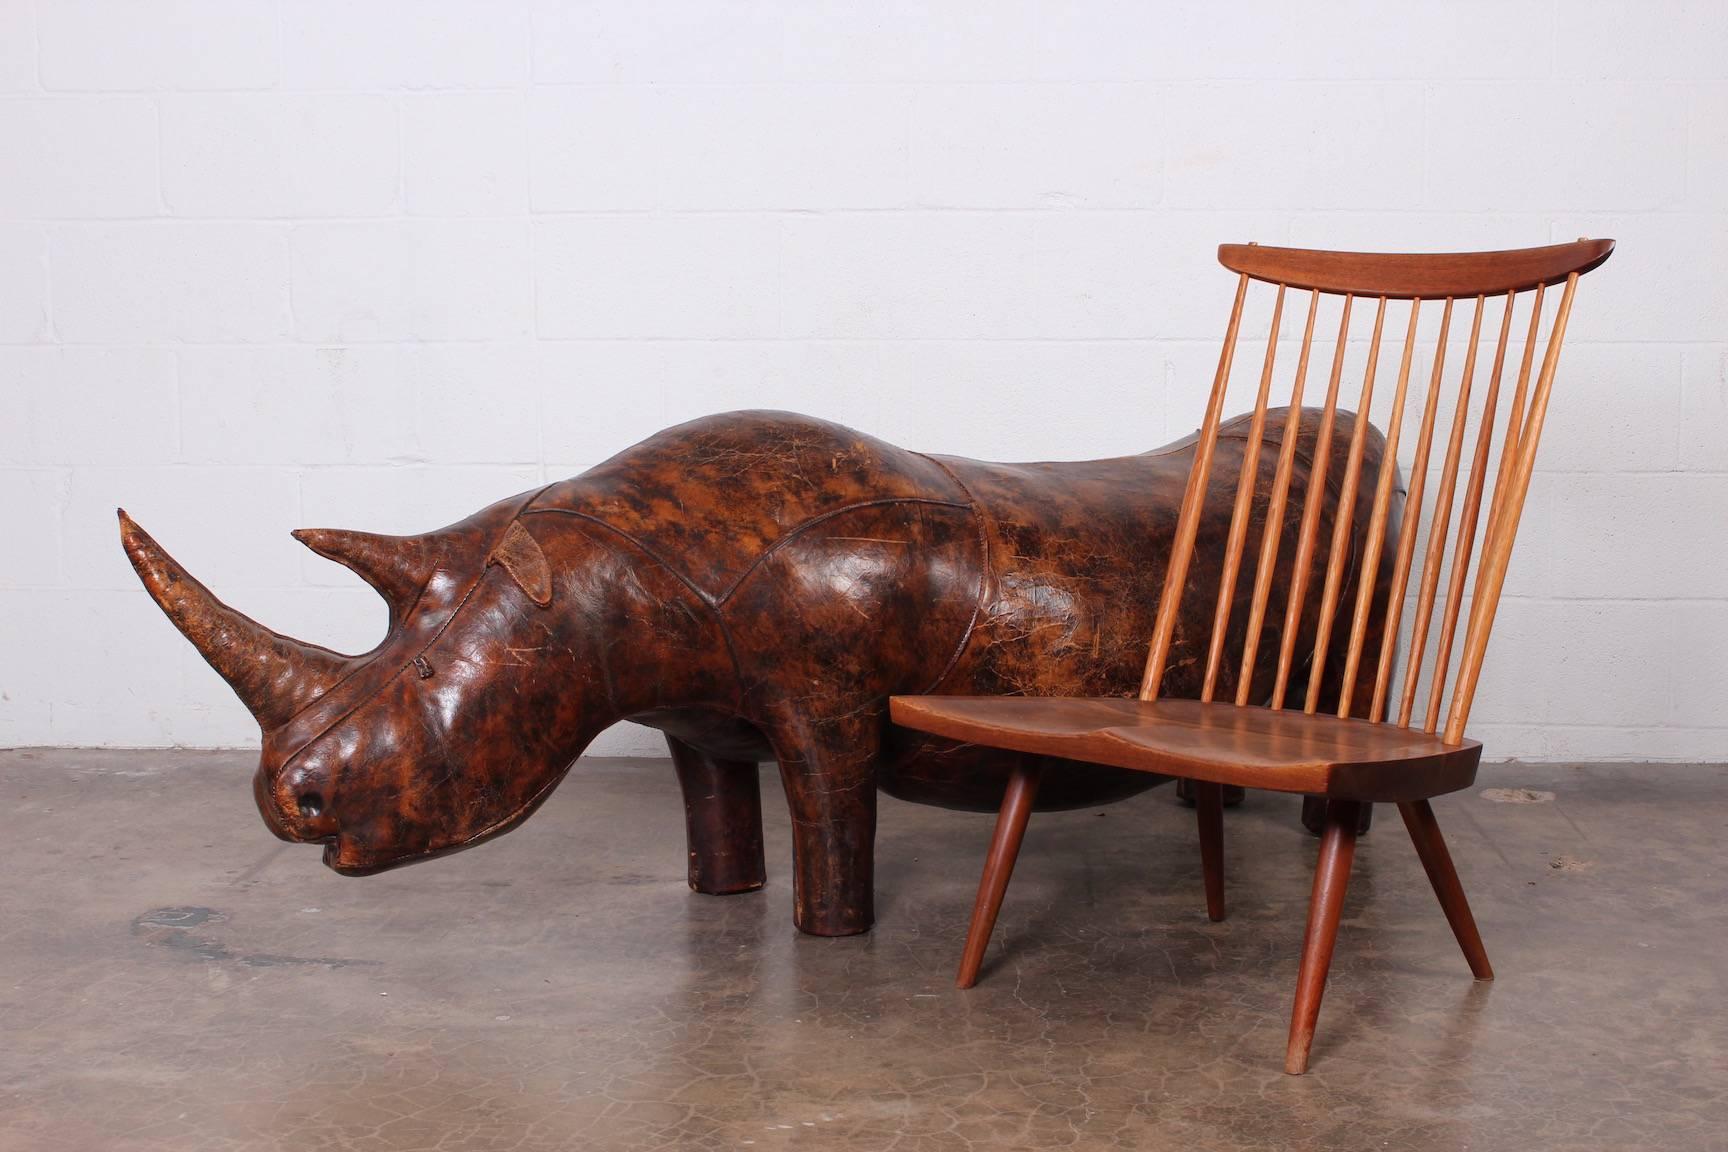 A large patinated leather bench in the form of a rhinoceros. Designed by Dimitri Omersa for Abercrombie & Fitch. Structurally sound and fully functional as a bench.